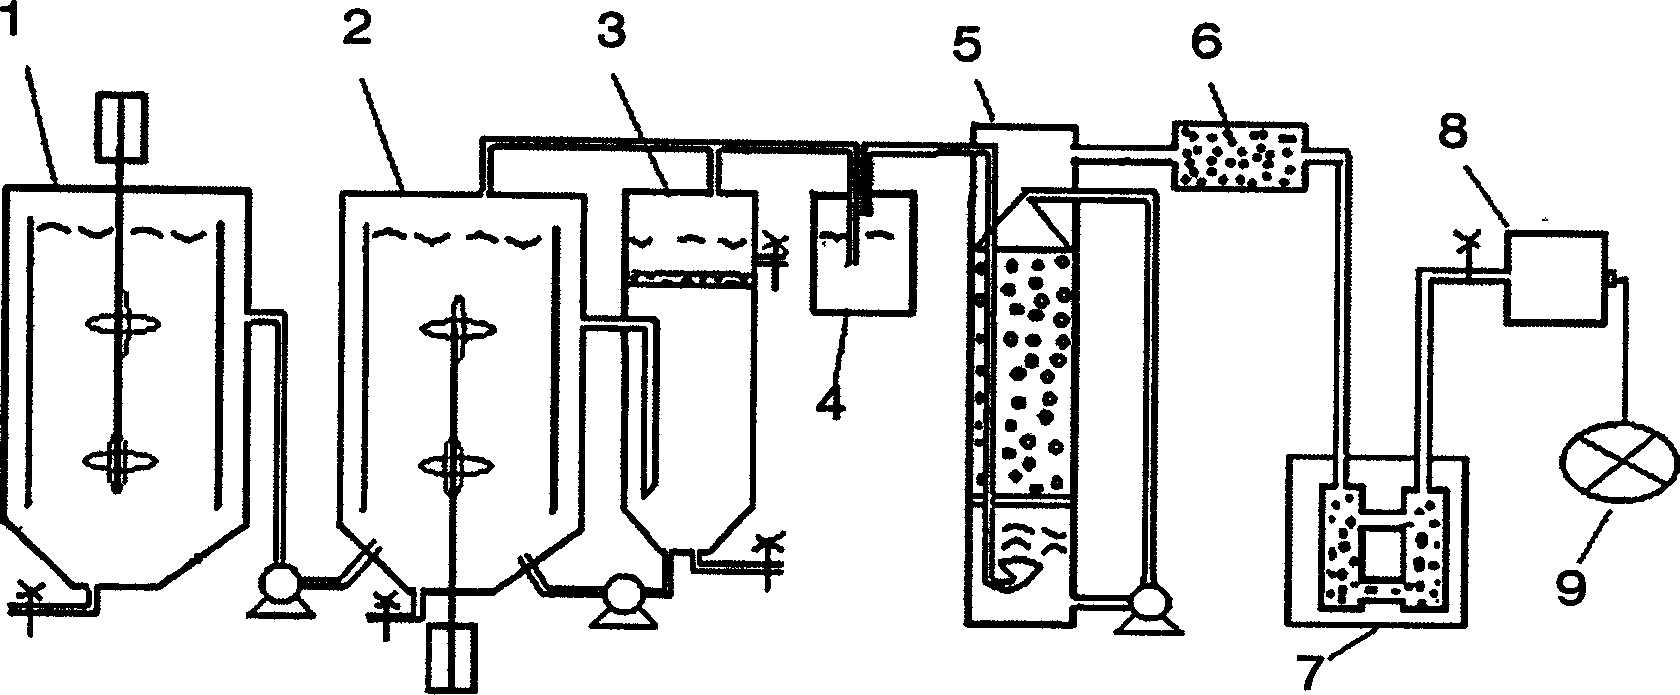 Hydrogen of prepared by bioorganism of crops and apparatus for generating by hydrogen energy